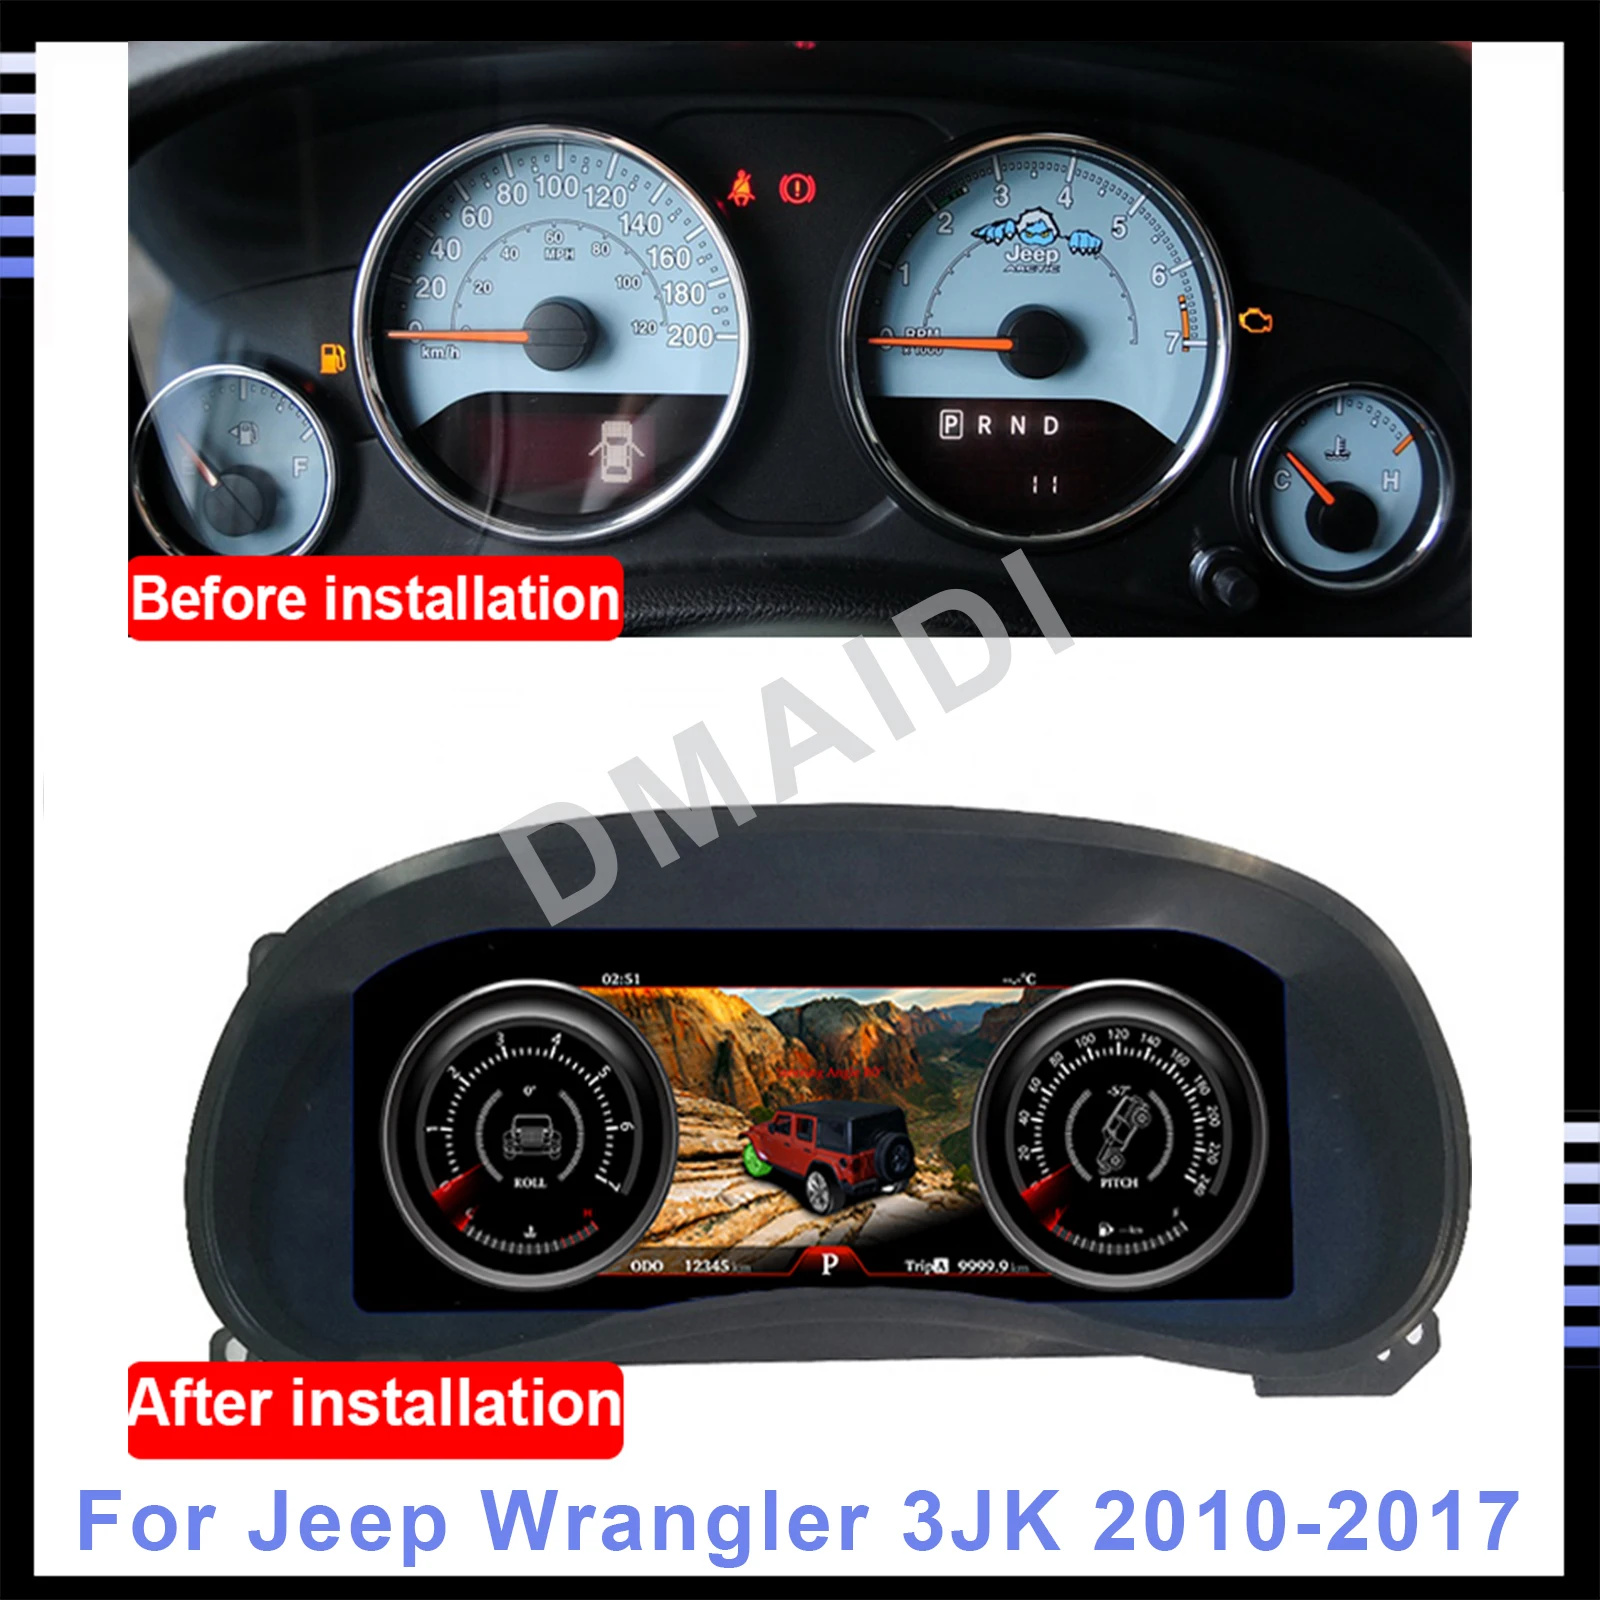 

Android 9.0 Car LCD Dashboard For Jeep Wrangler 3 JK 2011-2017 Auto Instrument Panel Modified And Upgraded LCD Multifunctional